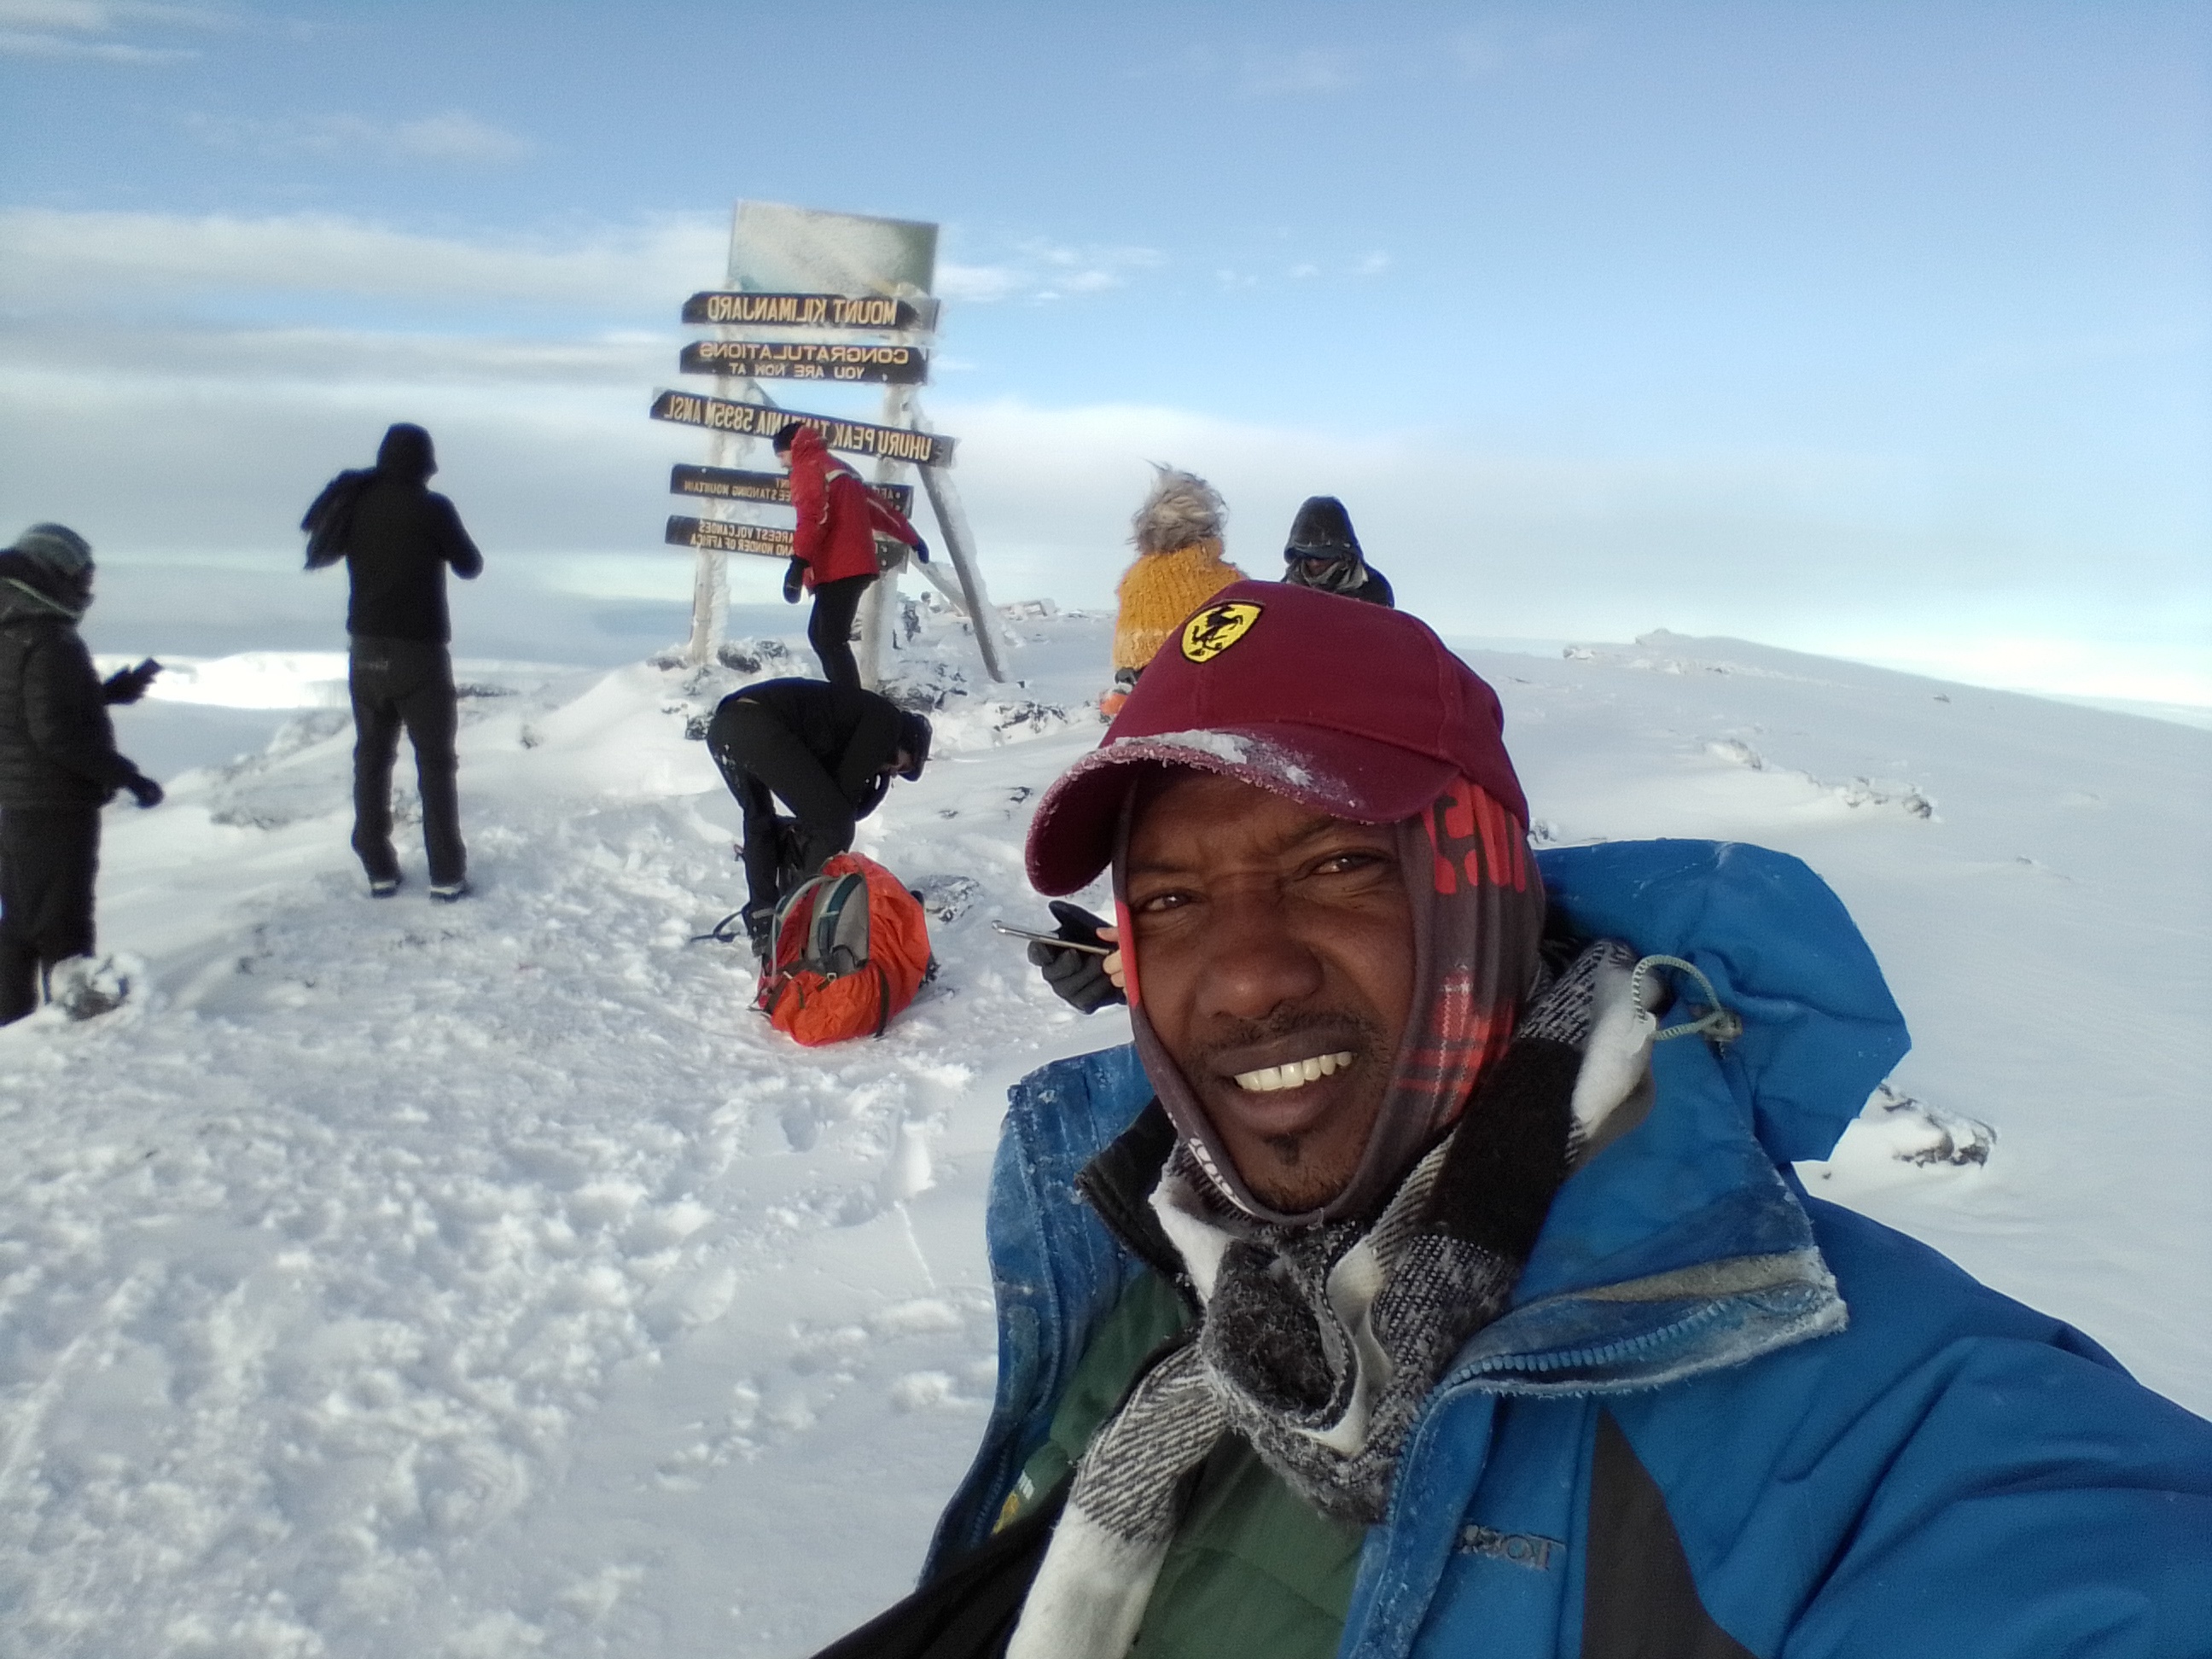 tourhub | Africa Natural Tours | Best 6 days Kilimanjaro hiking via Marangu route packages for 2023, 2024 and 2025 from Moshi and Arusha Tanzania with AFRICA NATURAL TOURS. 